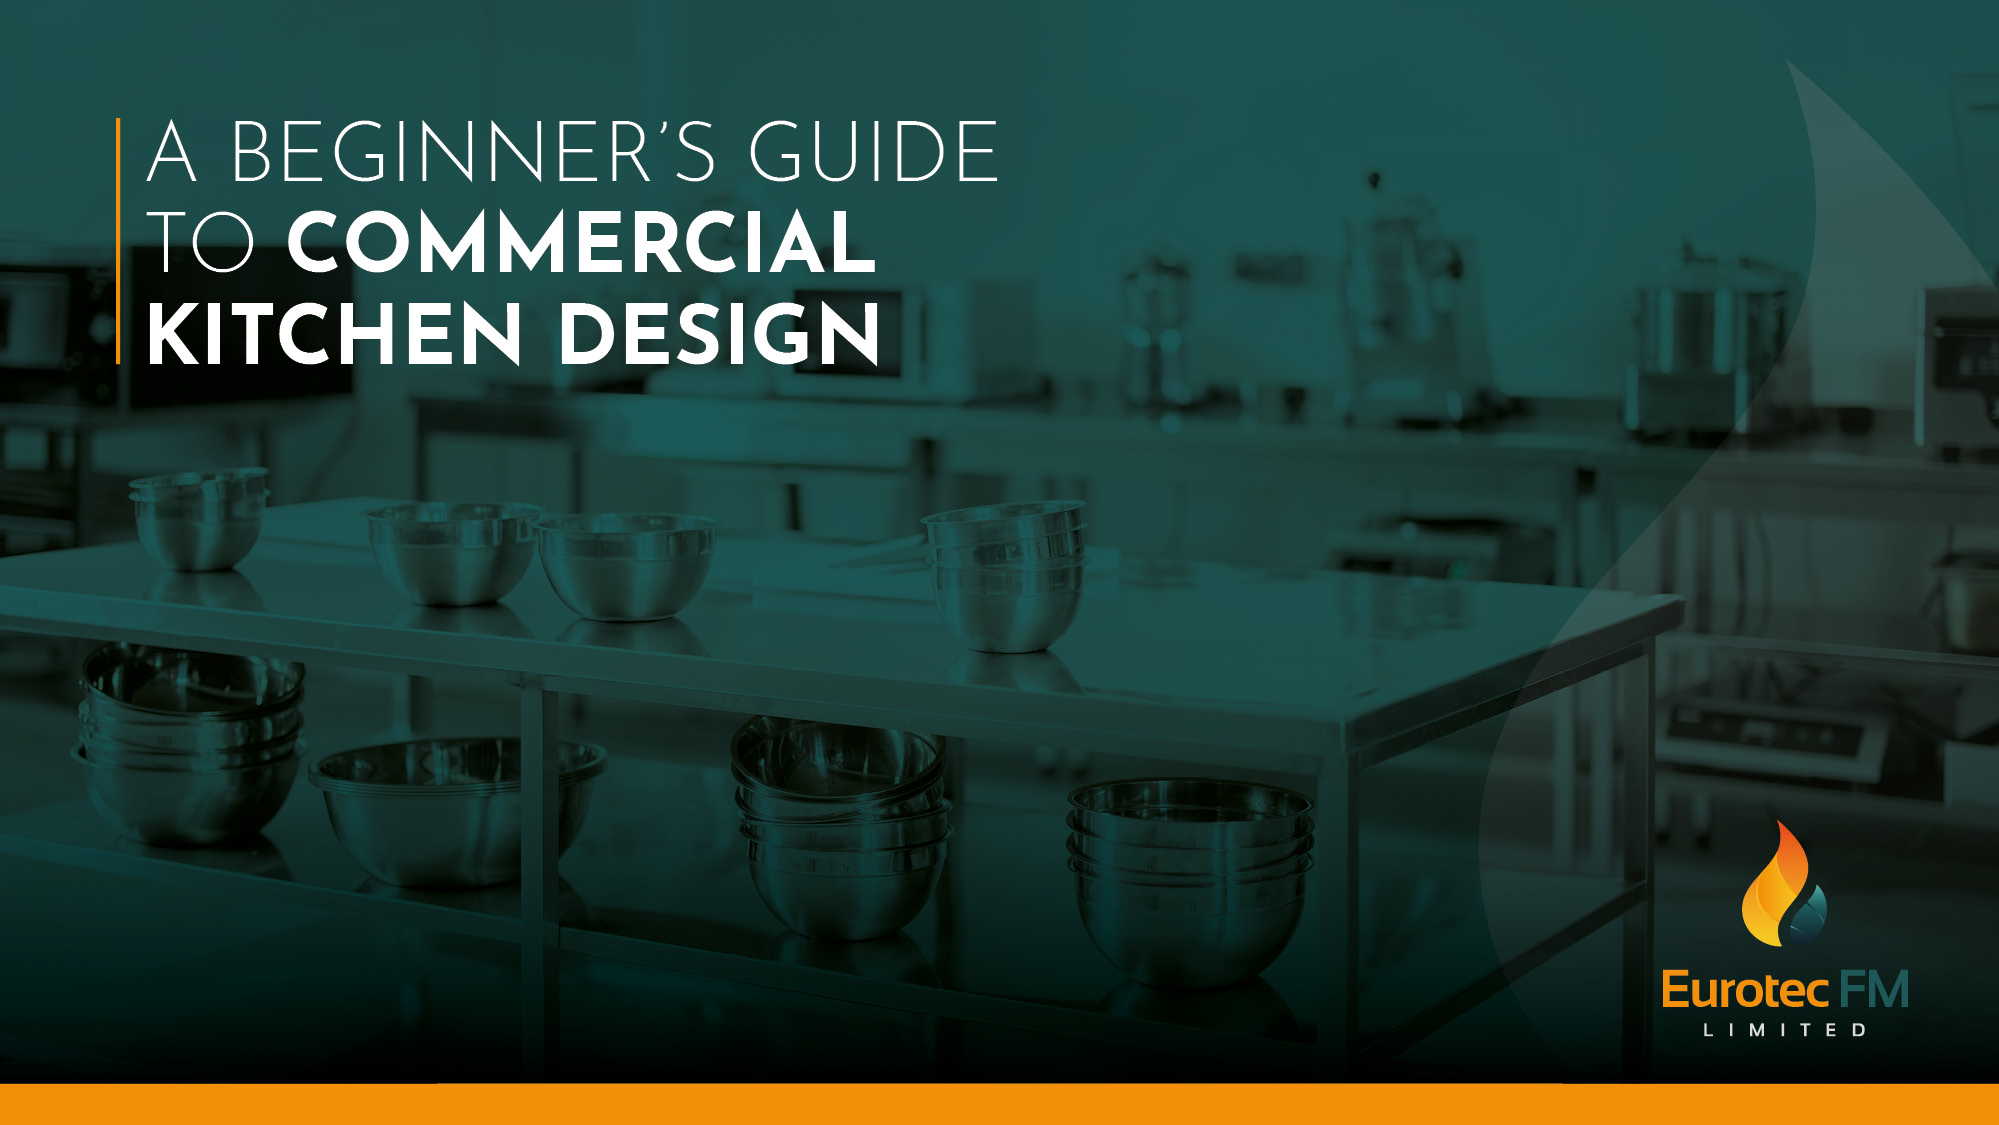 Eurotec FM Guide To Commercial Kitchen Layout 16 9 Title 